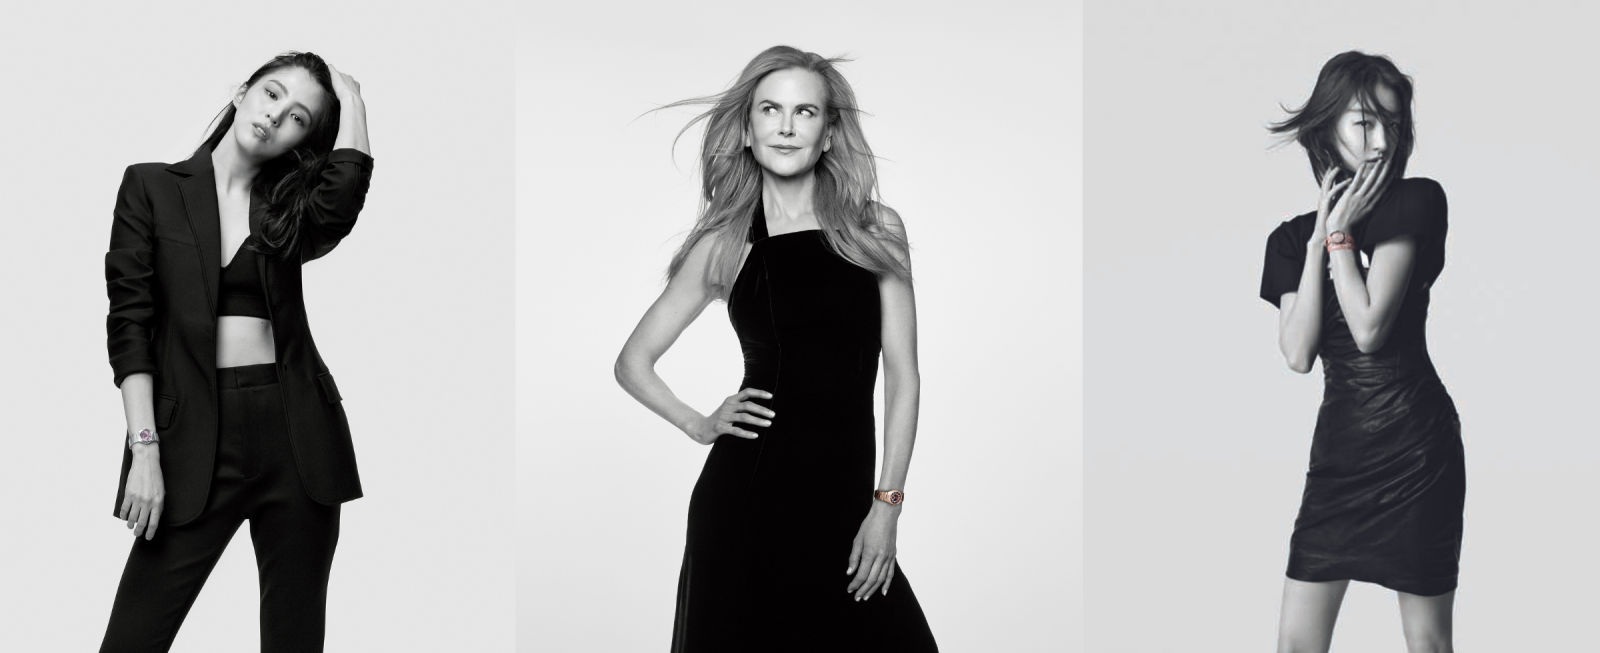 Omega shines spotlight on women who inspire in female-focused campaign